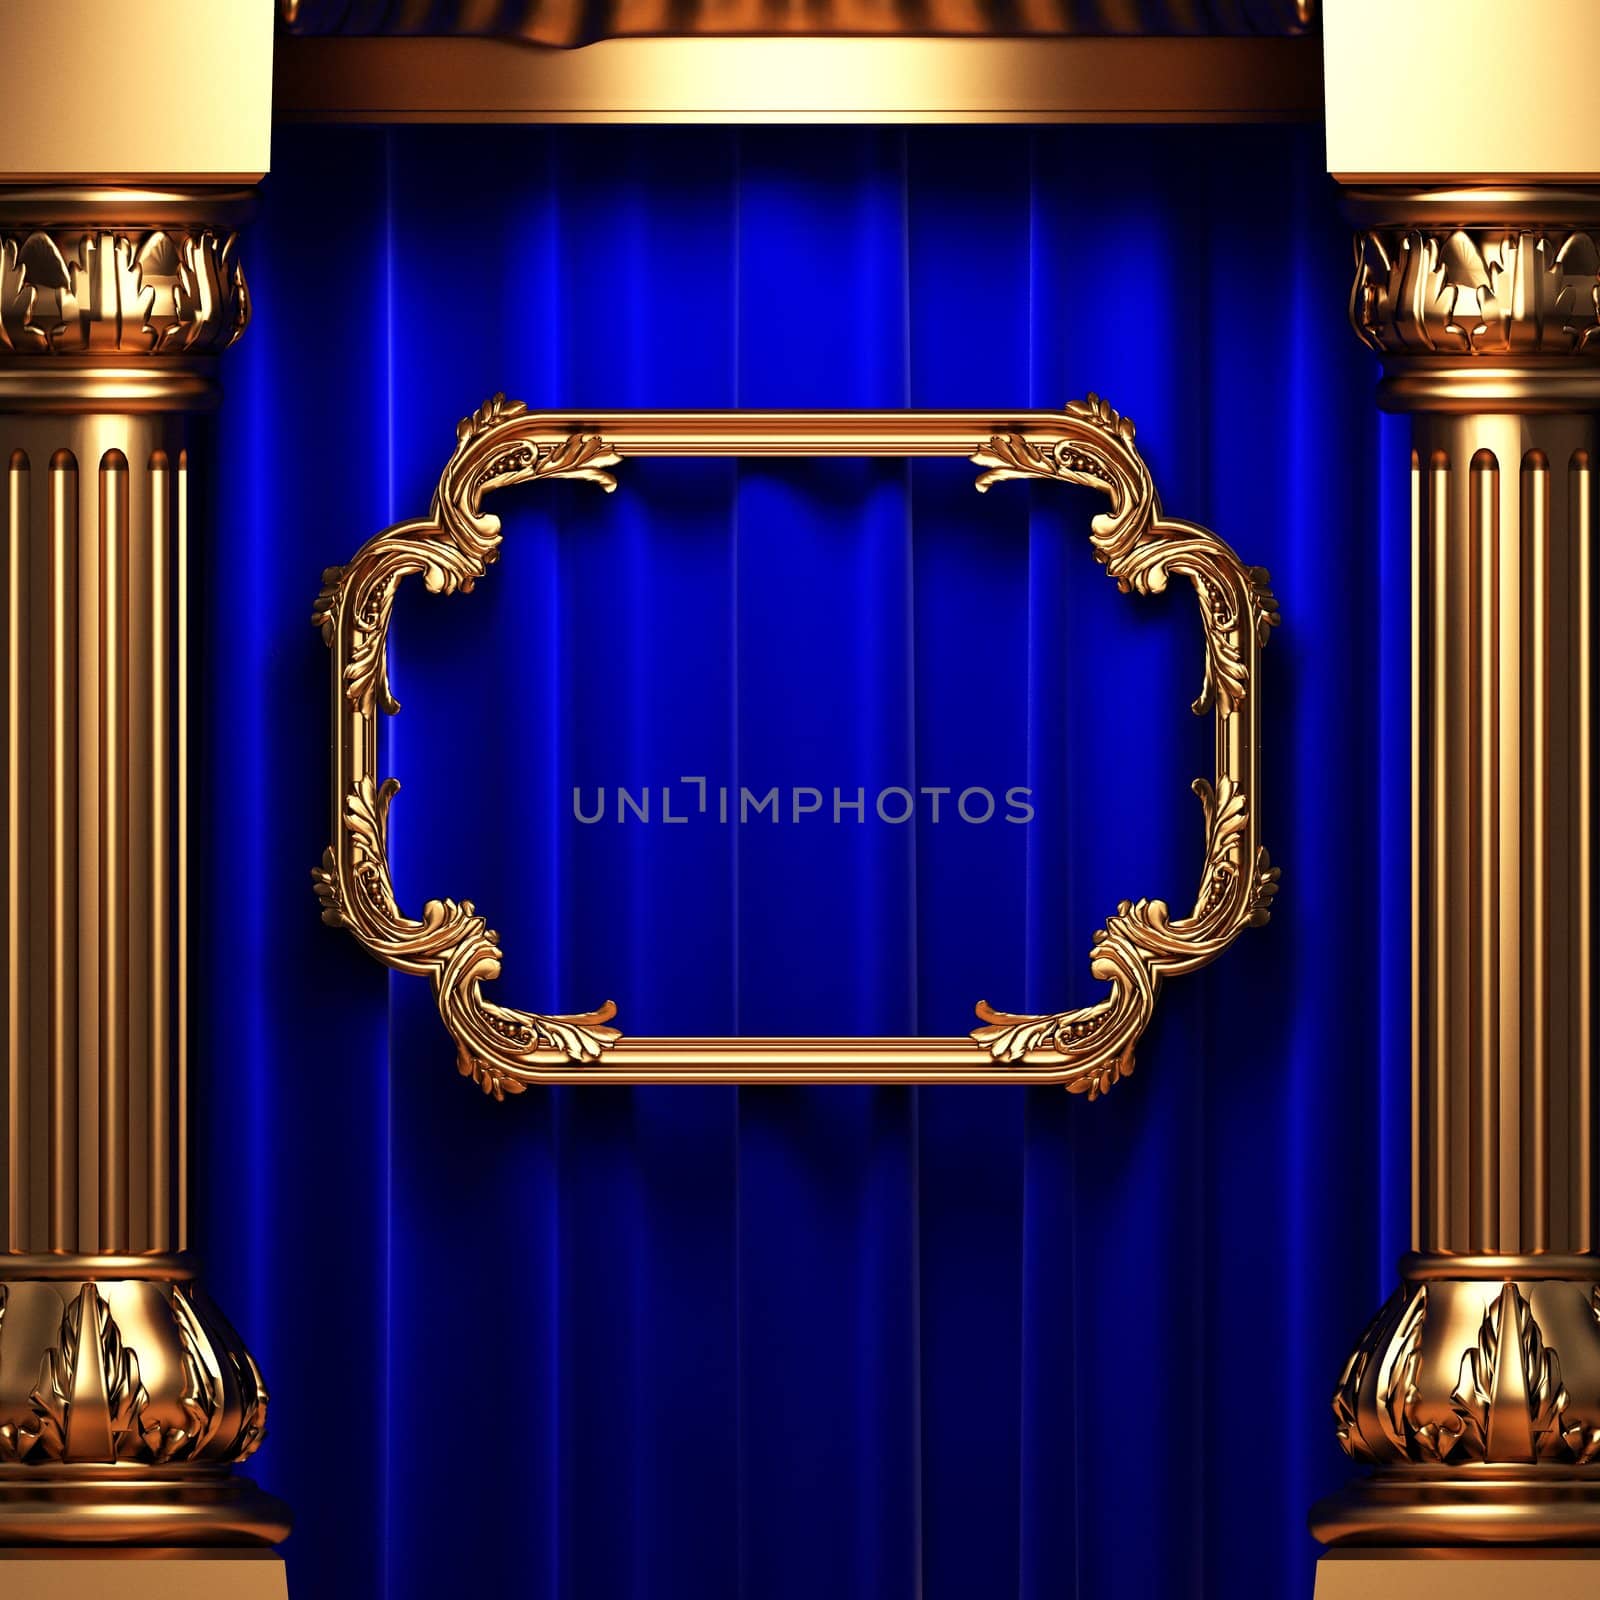 blue curtains, gold columns and frames made in 3d